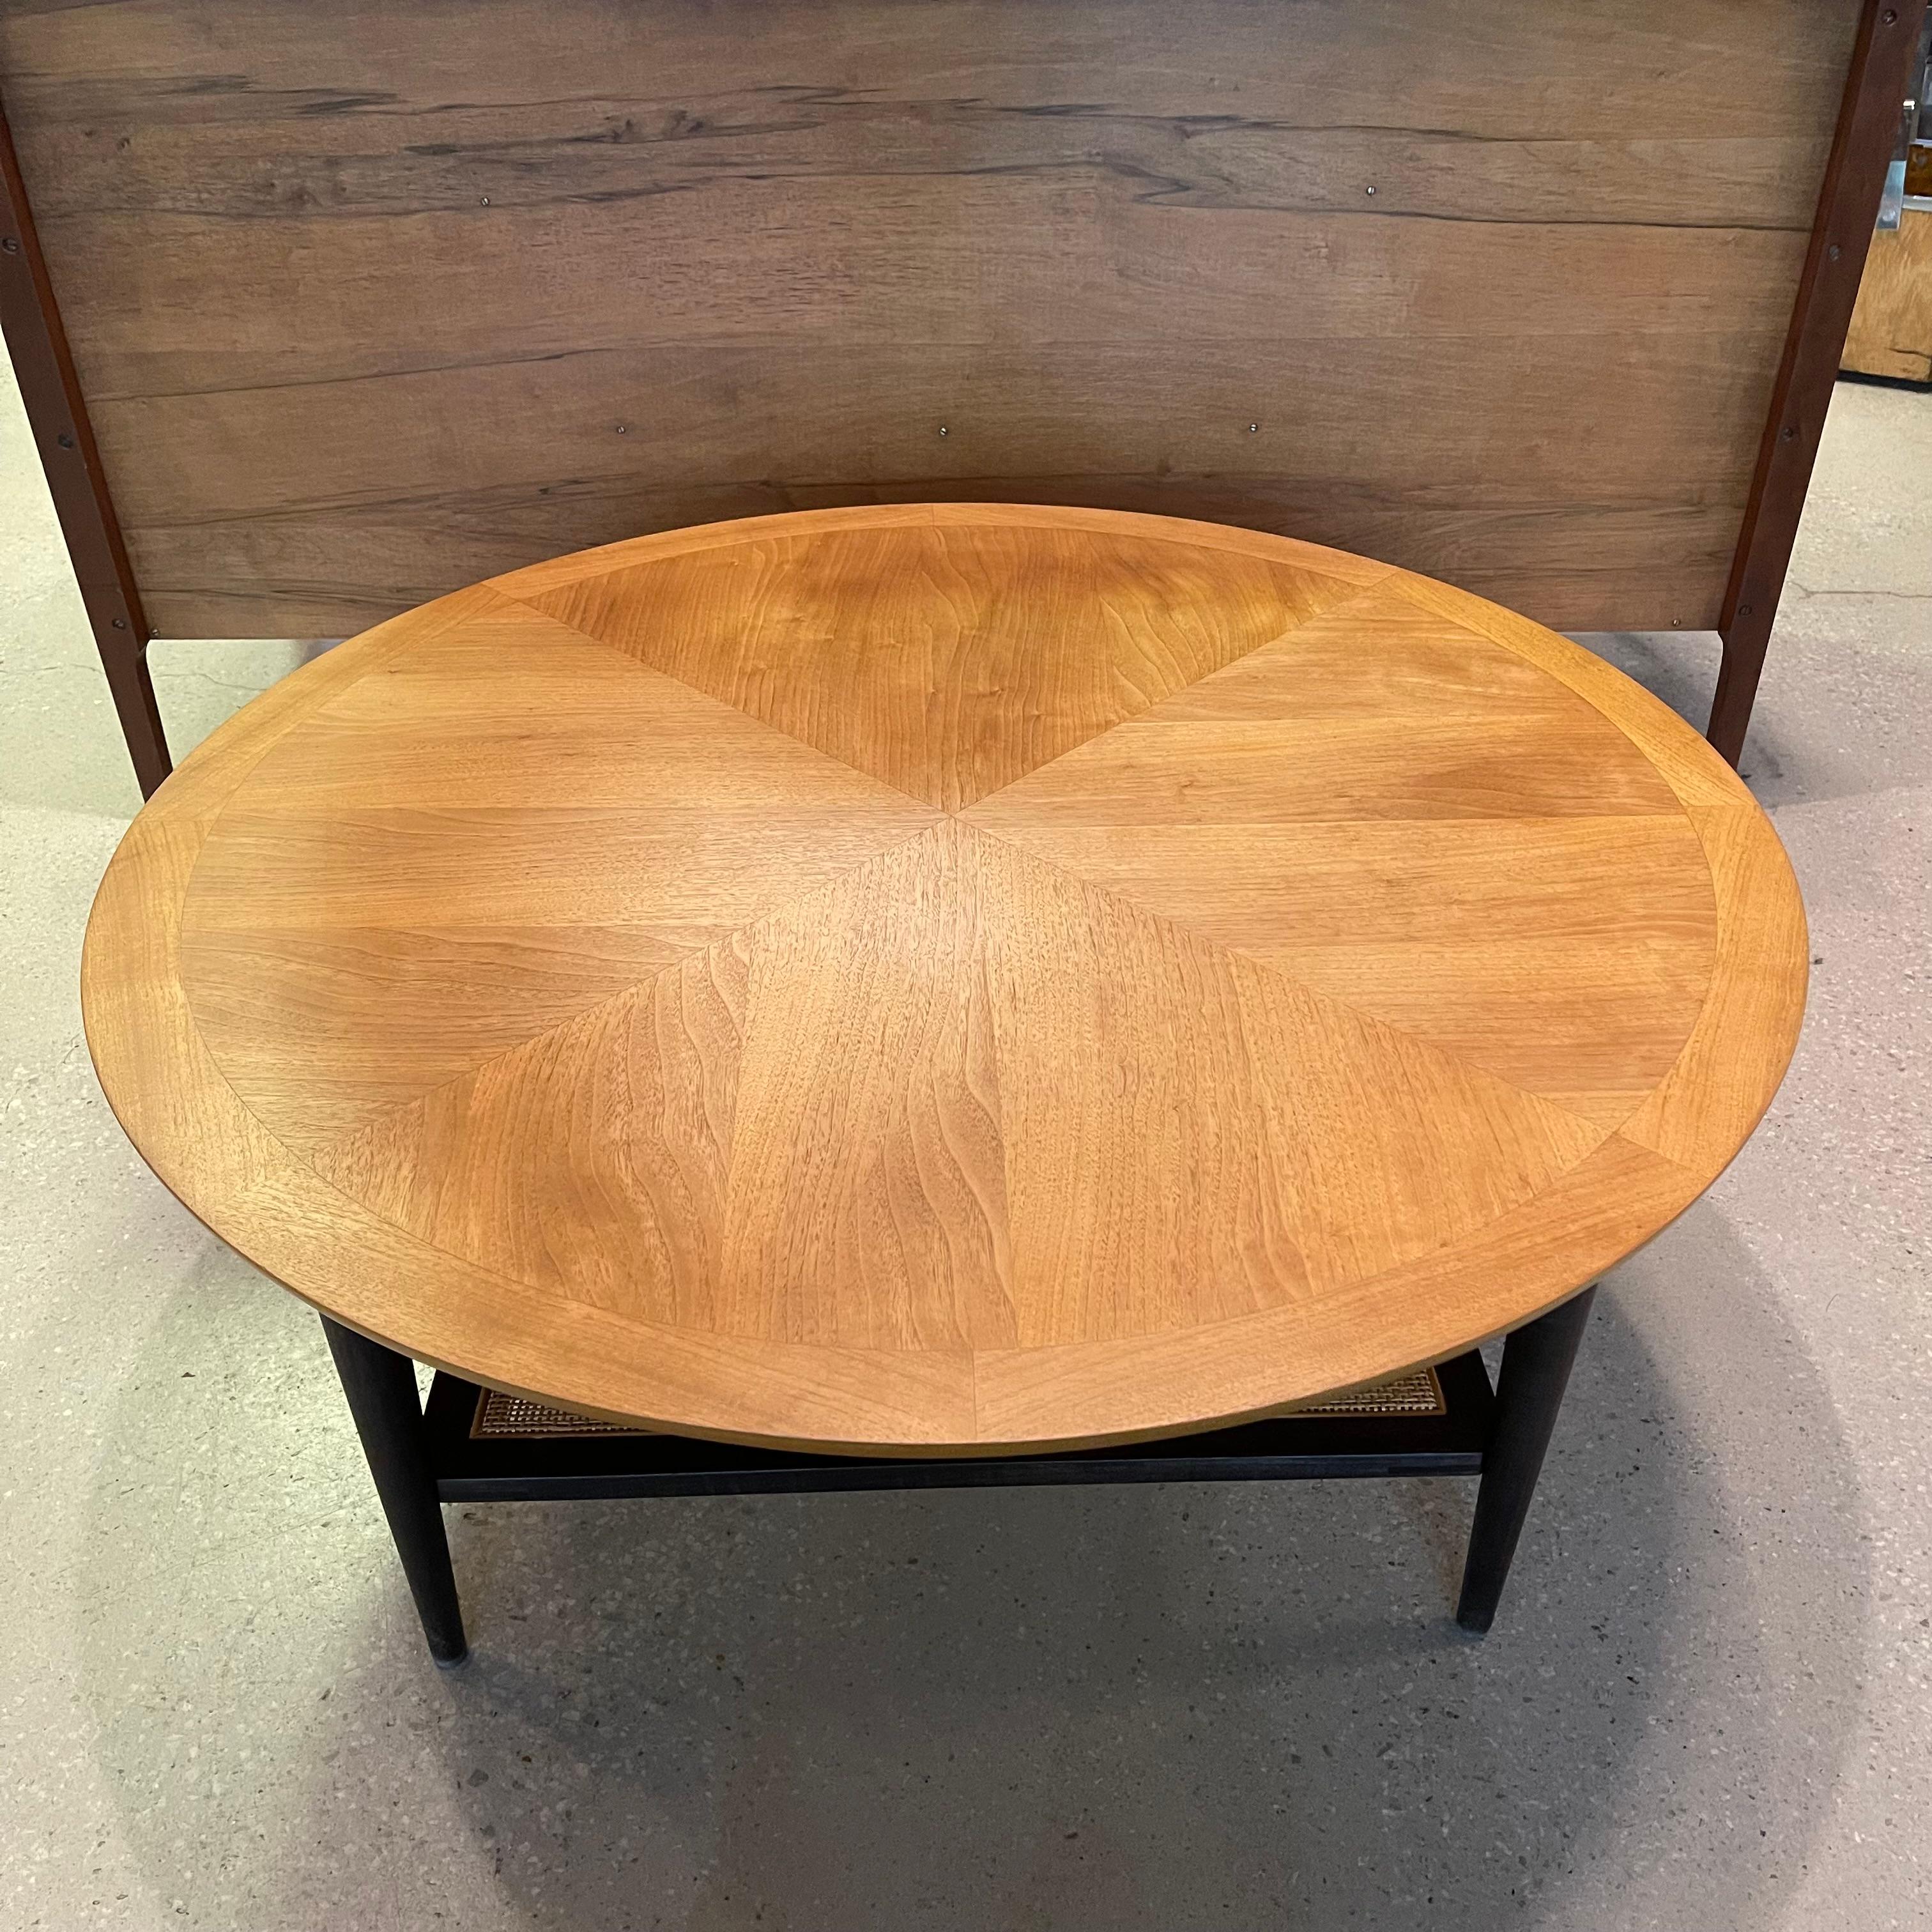 American Mid-Century Modern Round Coffee Table By Lane Alta Vista For Sale